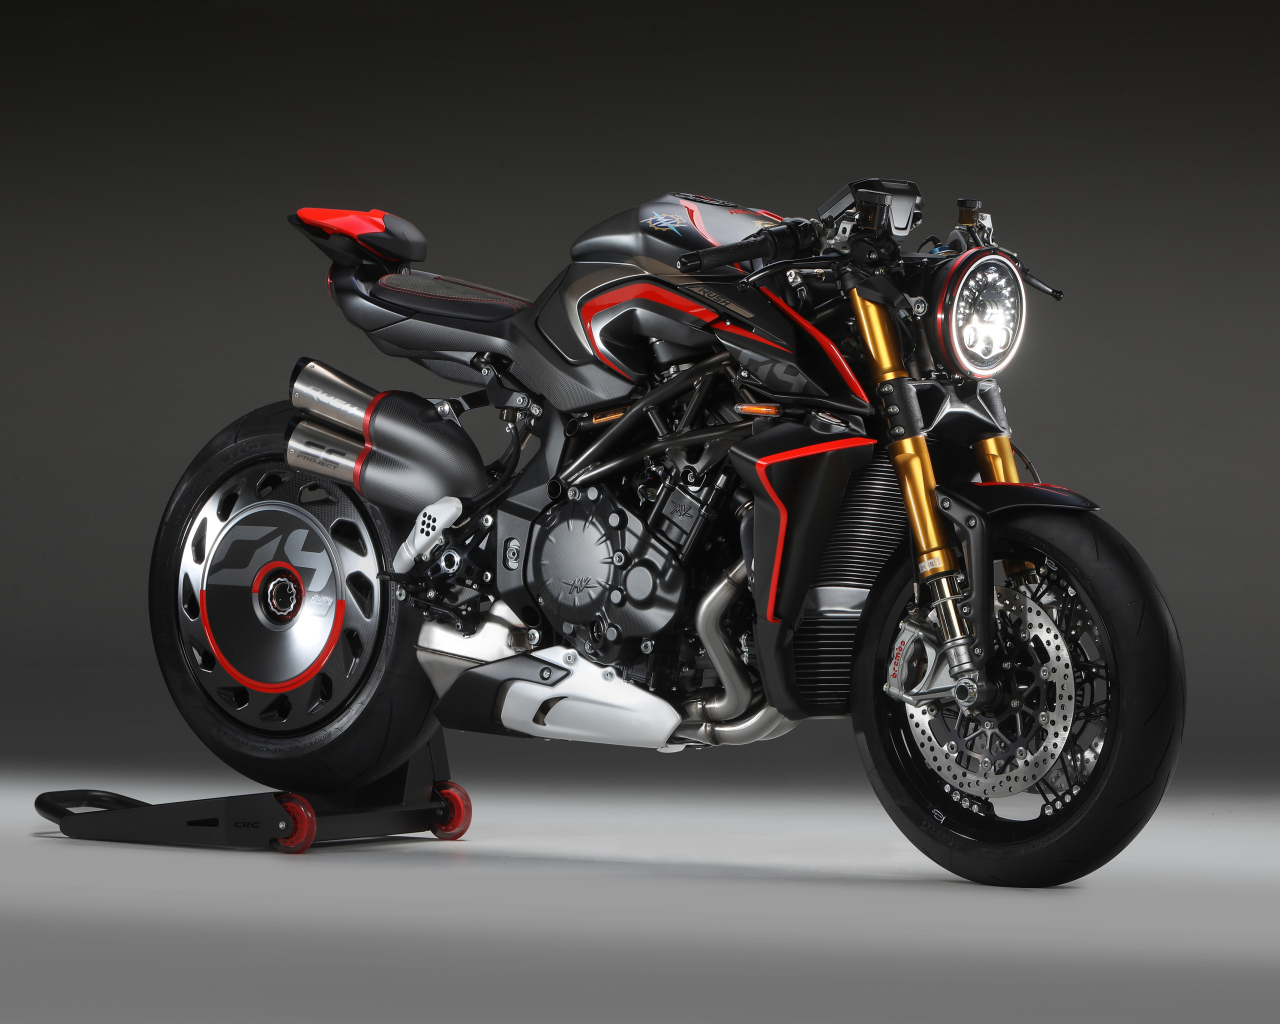 Heavy Agusta Rush 1000 motorcycle, 2020 on a gray background